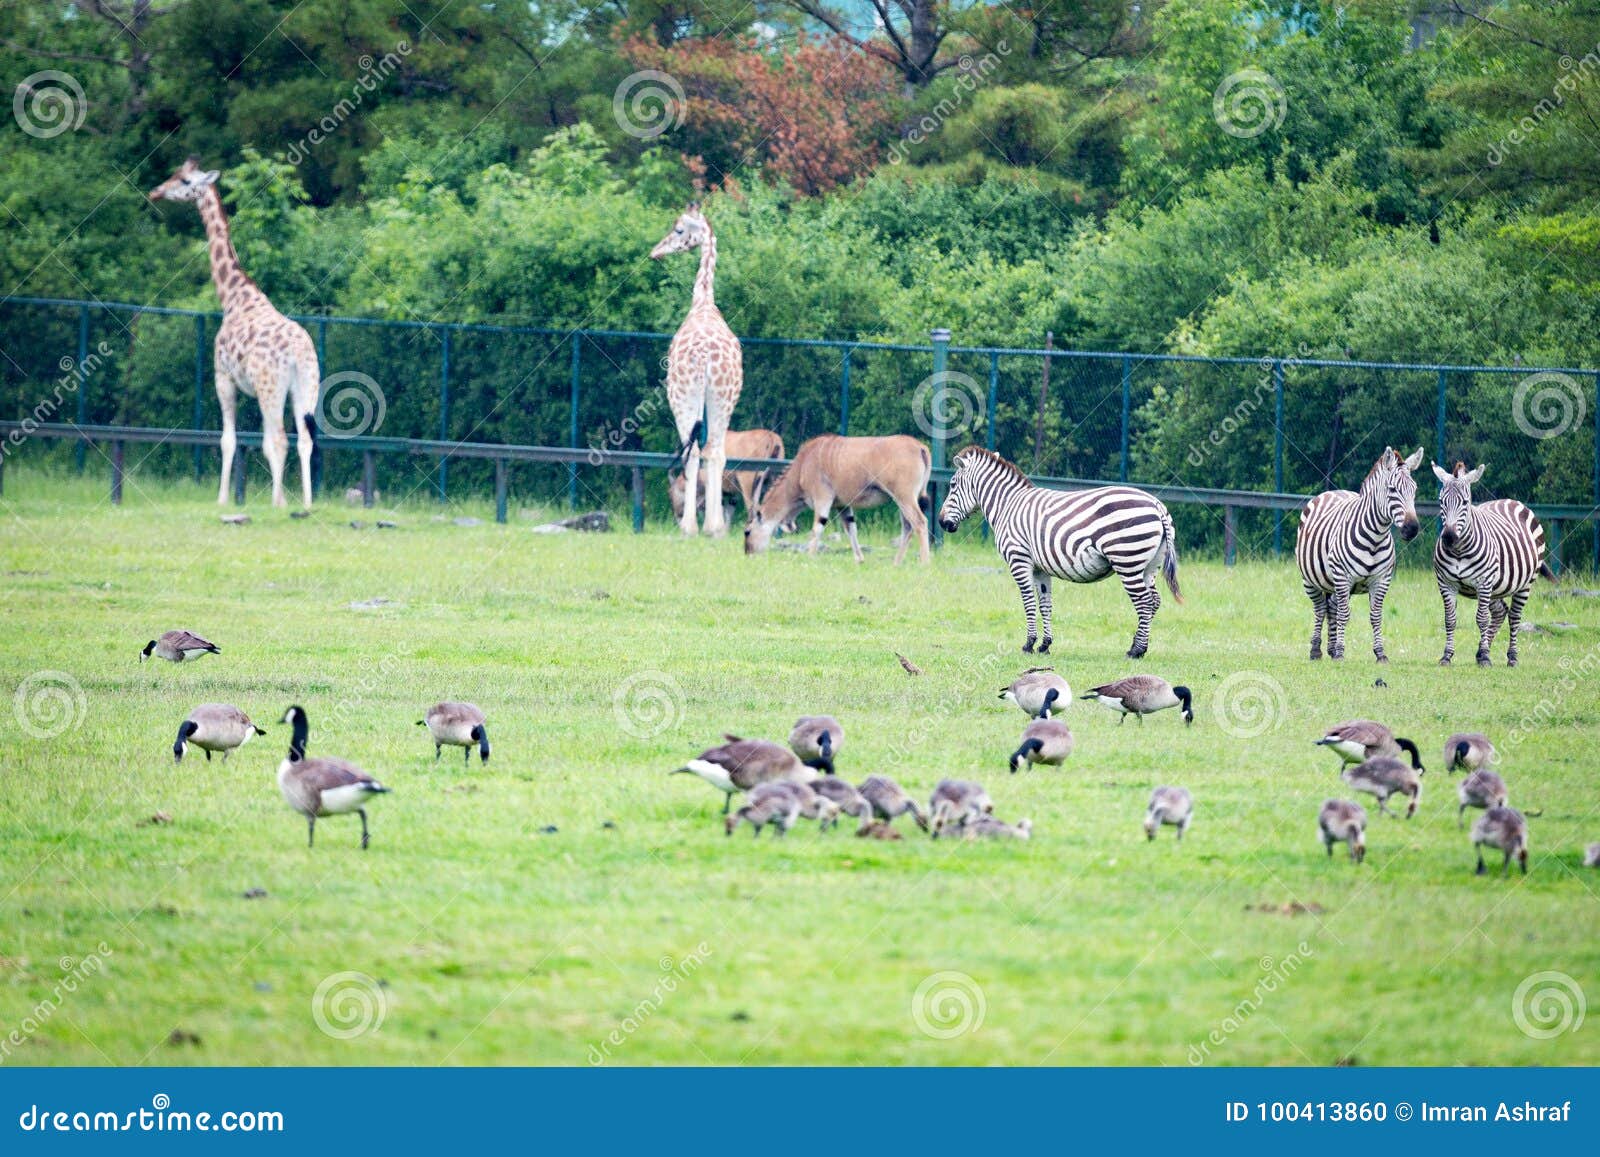 Wild Anumals Eating Grass in the Field Stock Photo - Image of anumals,  herbivore: 100413860